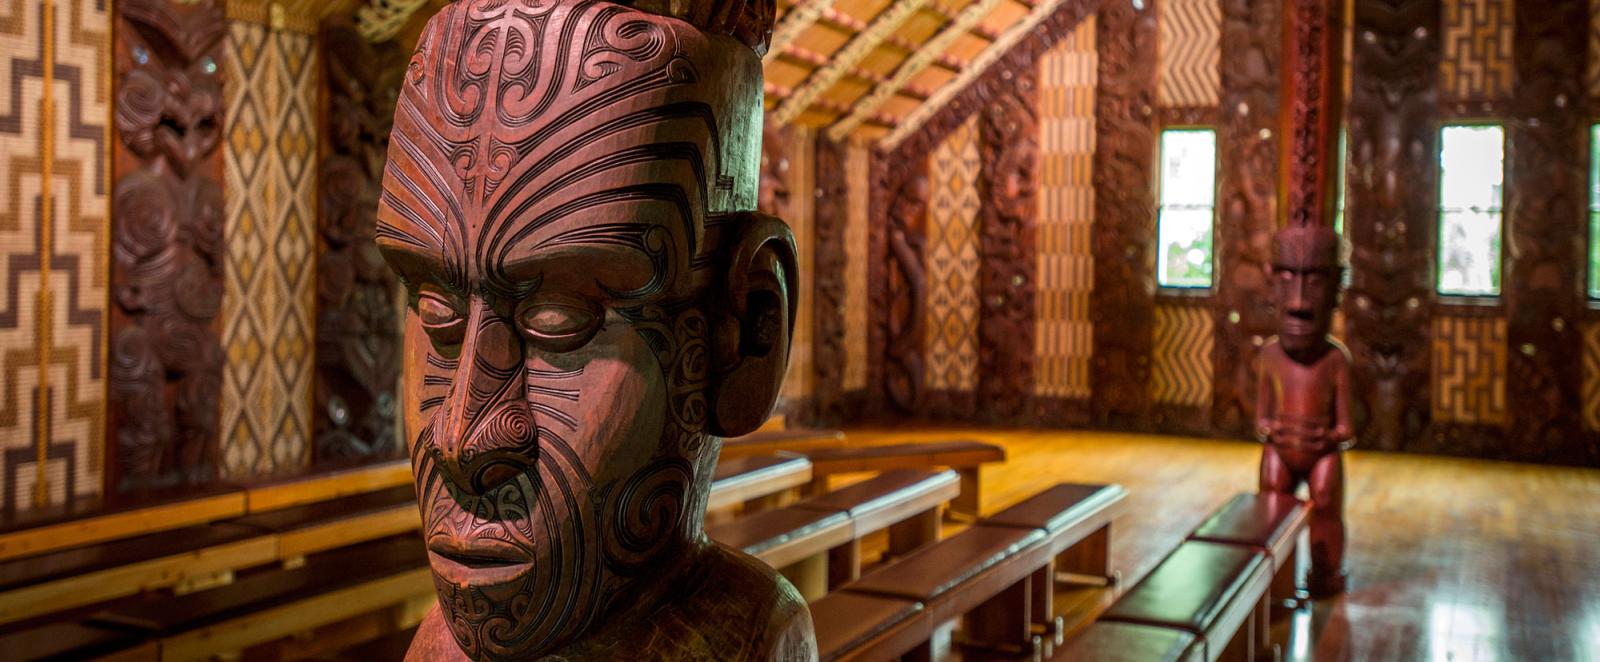 A couple examining the intricate carvings at the Waitangi marae (meeting grounds)